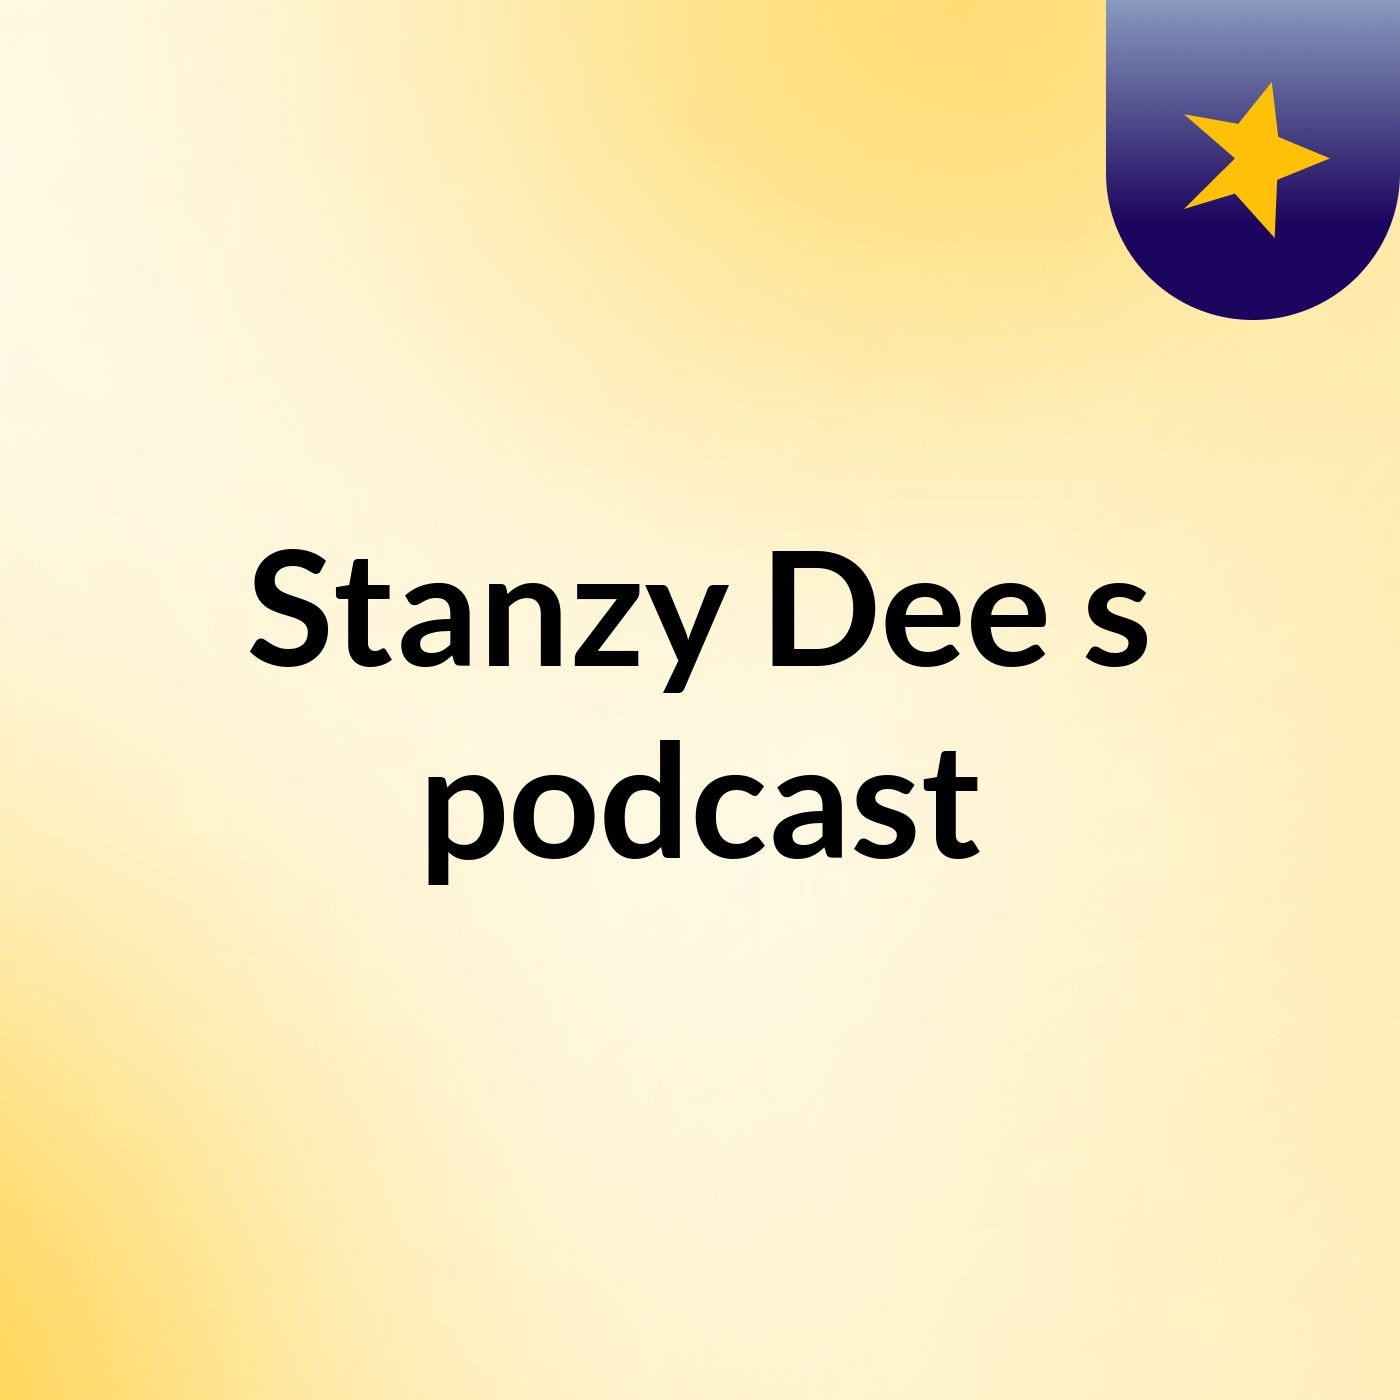 Episode 2 - Stanzy Dee's podcast